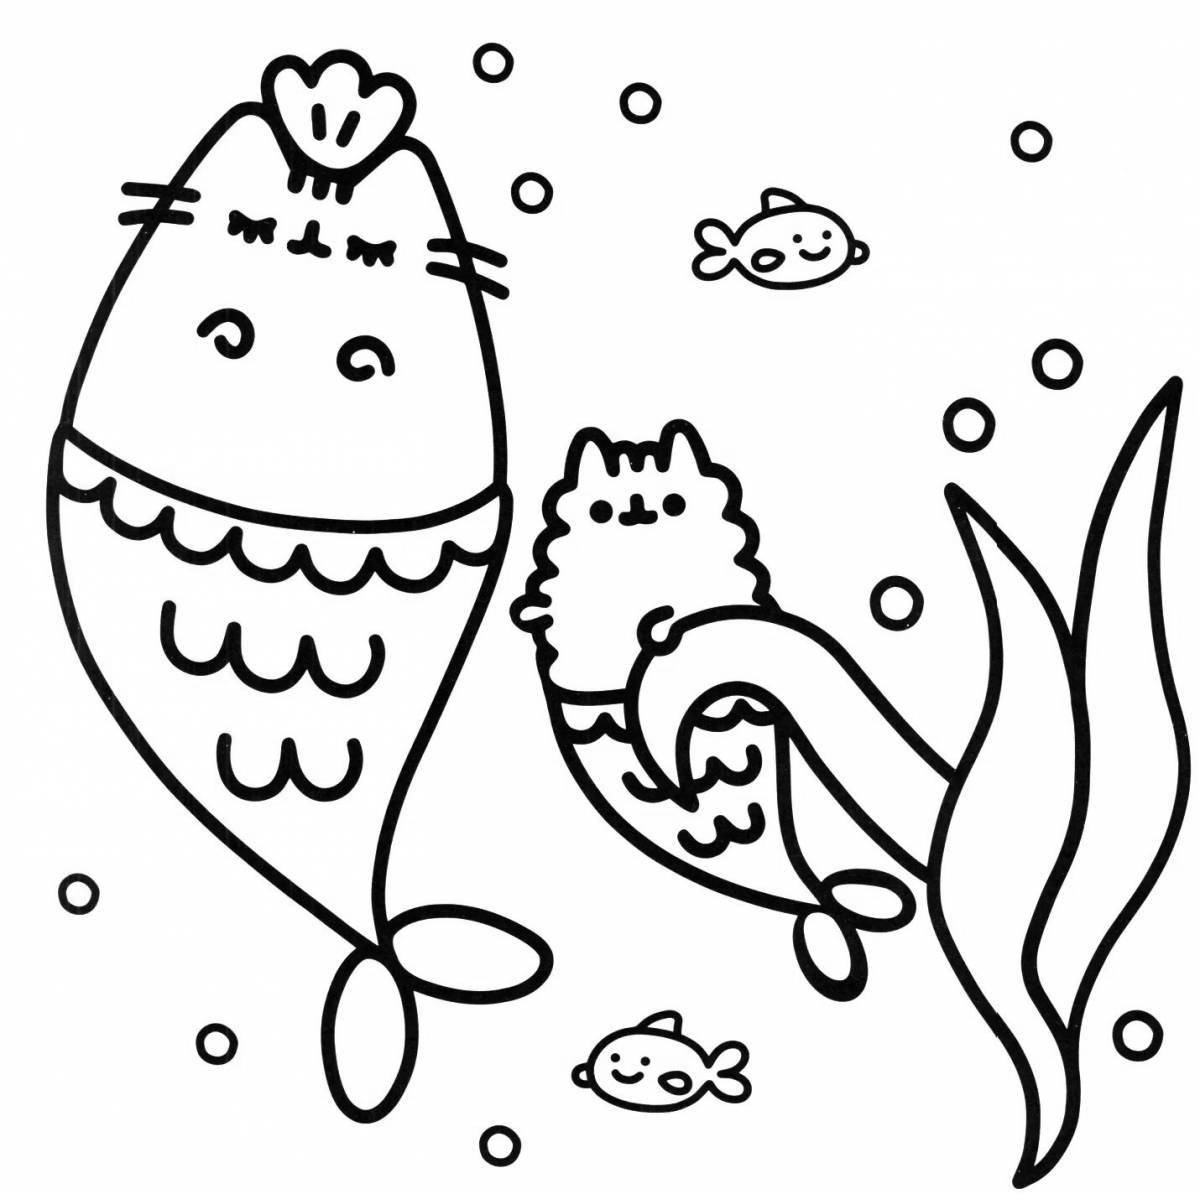 Awesome pusheen unicorn coloring page